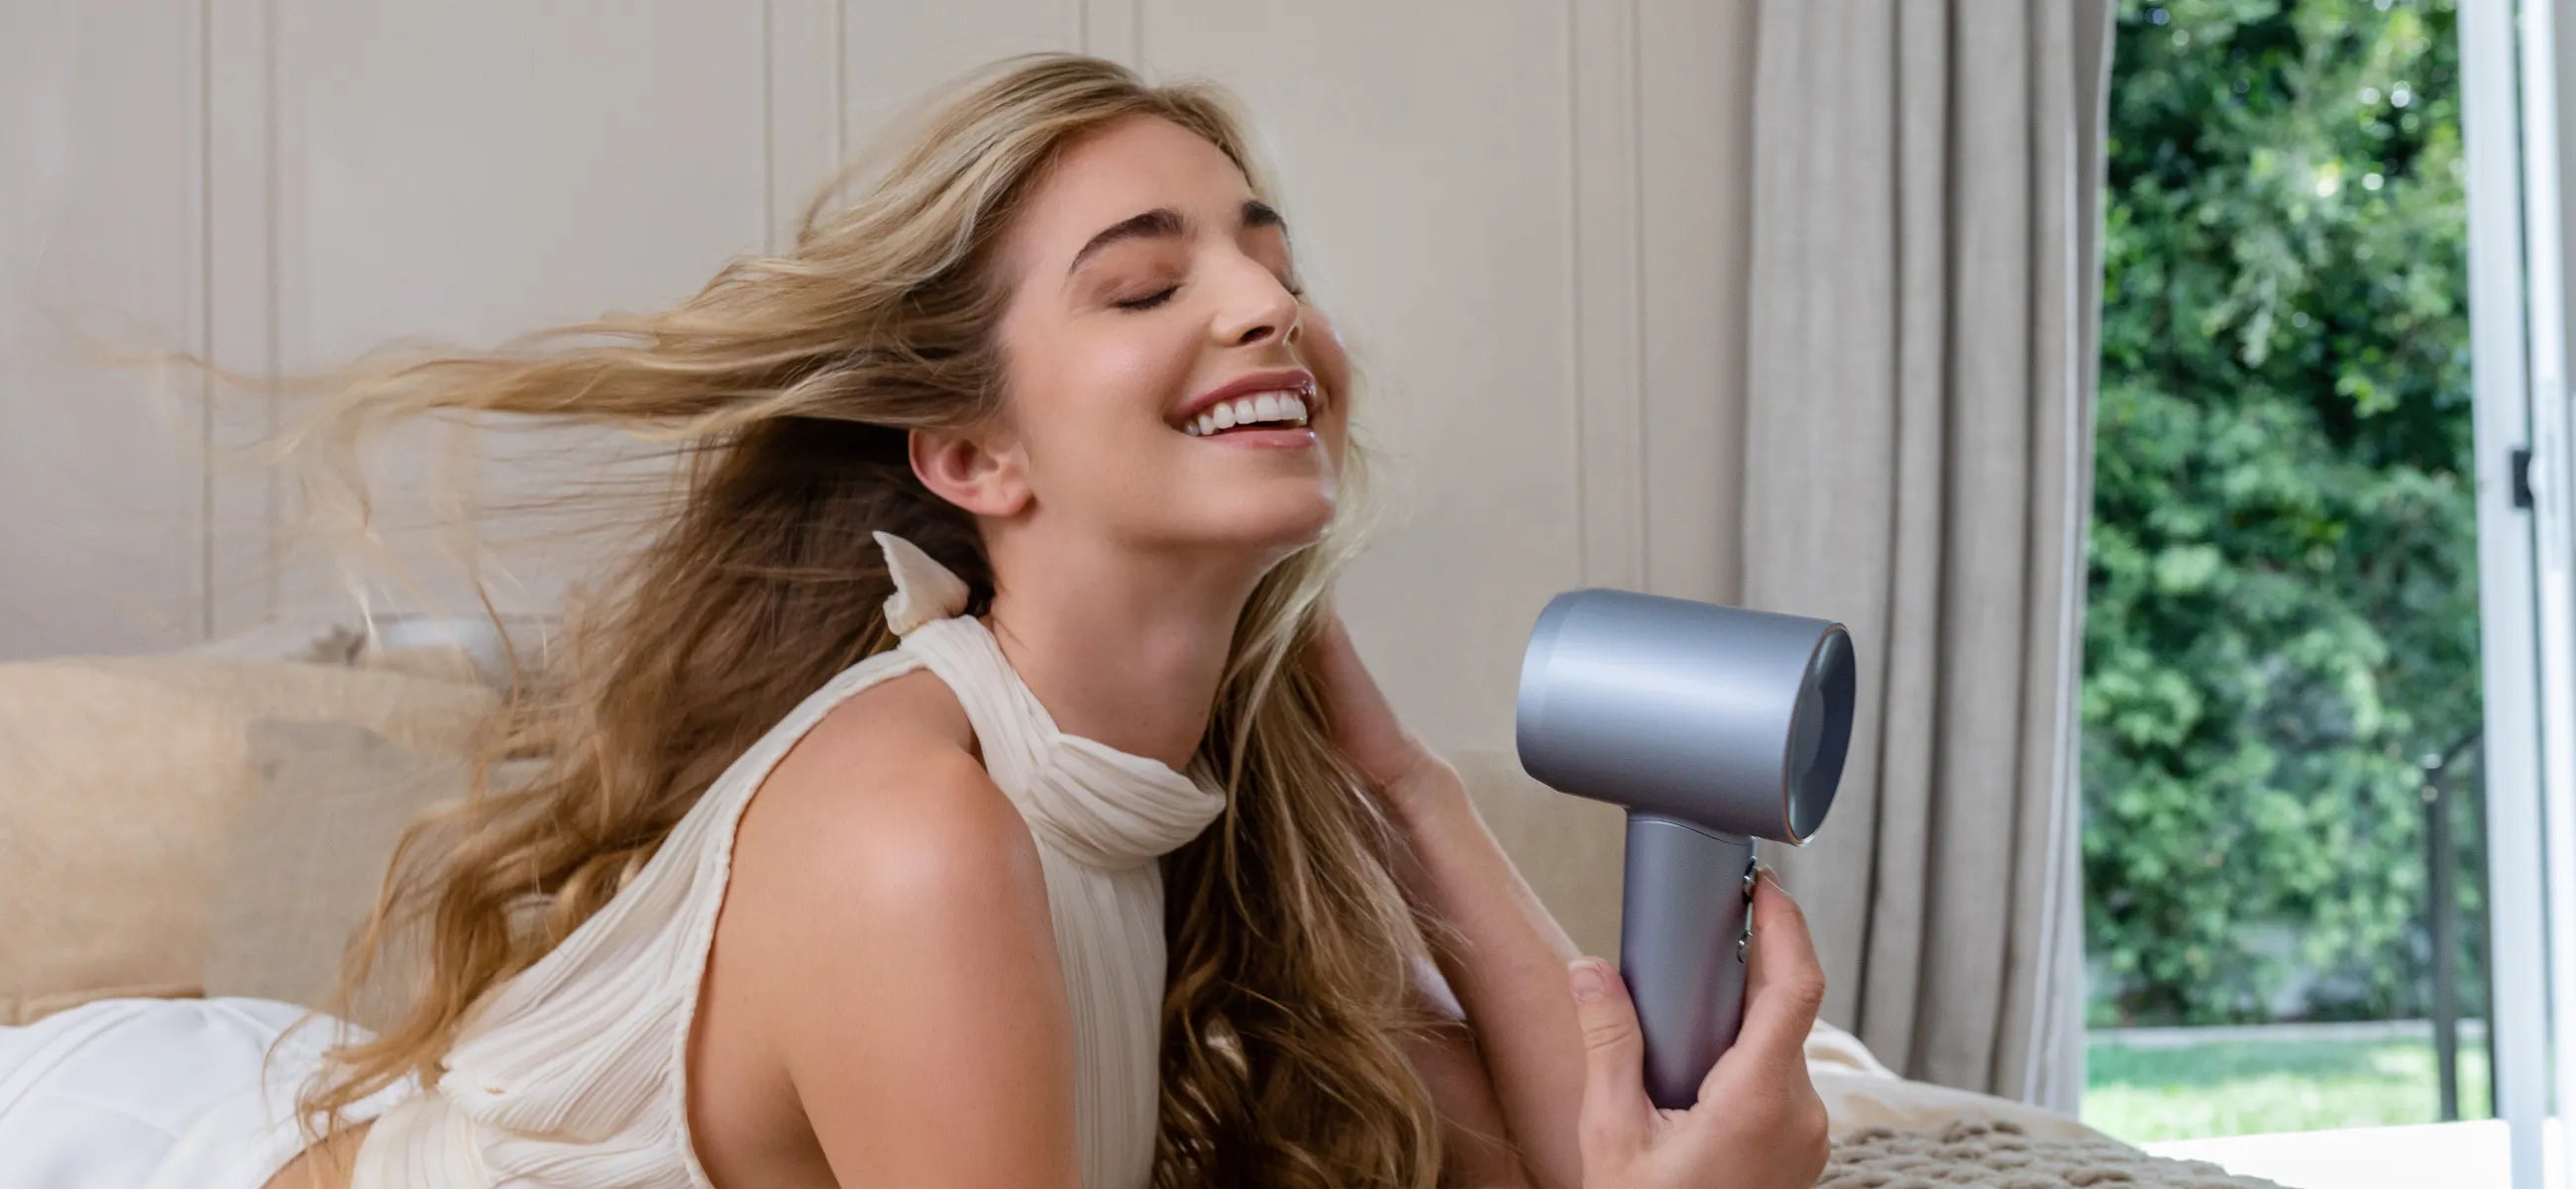 How to dry wavy hair: The perfect way hair drying routine